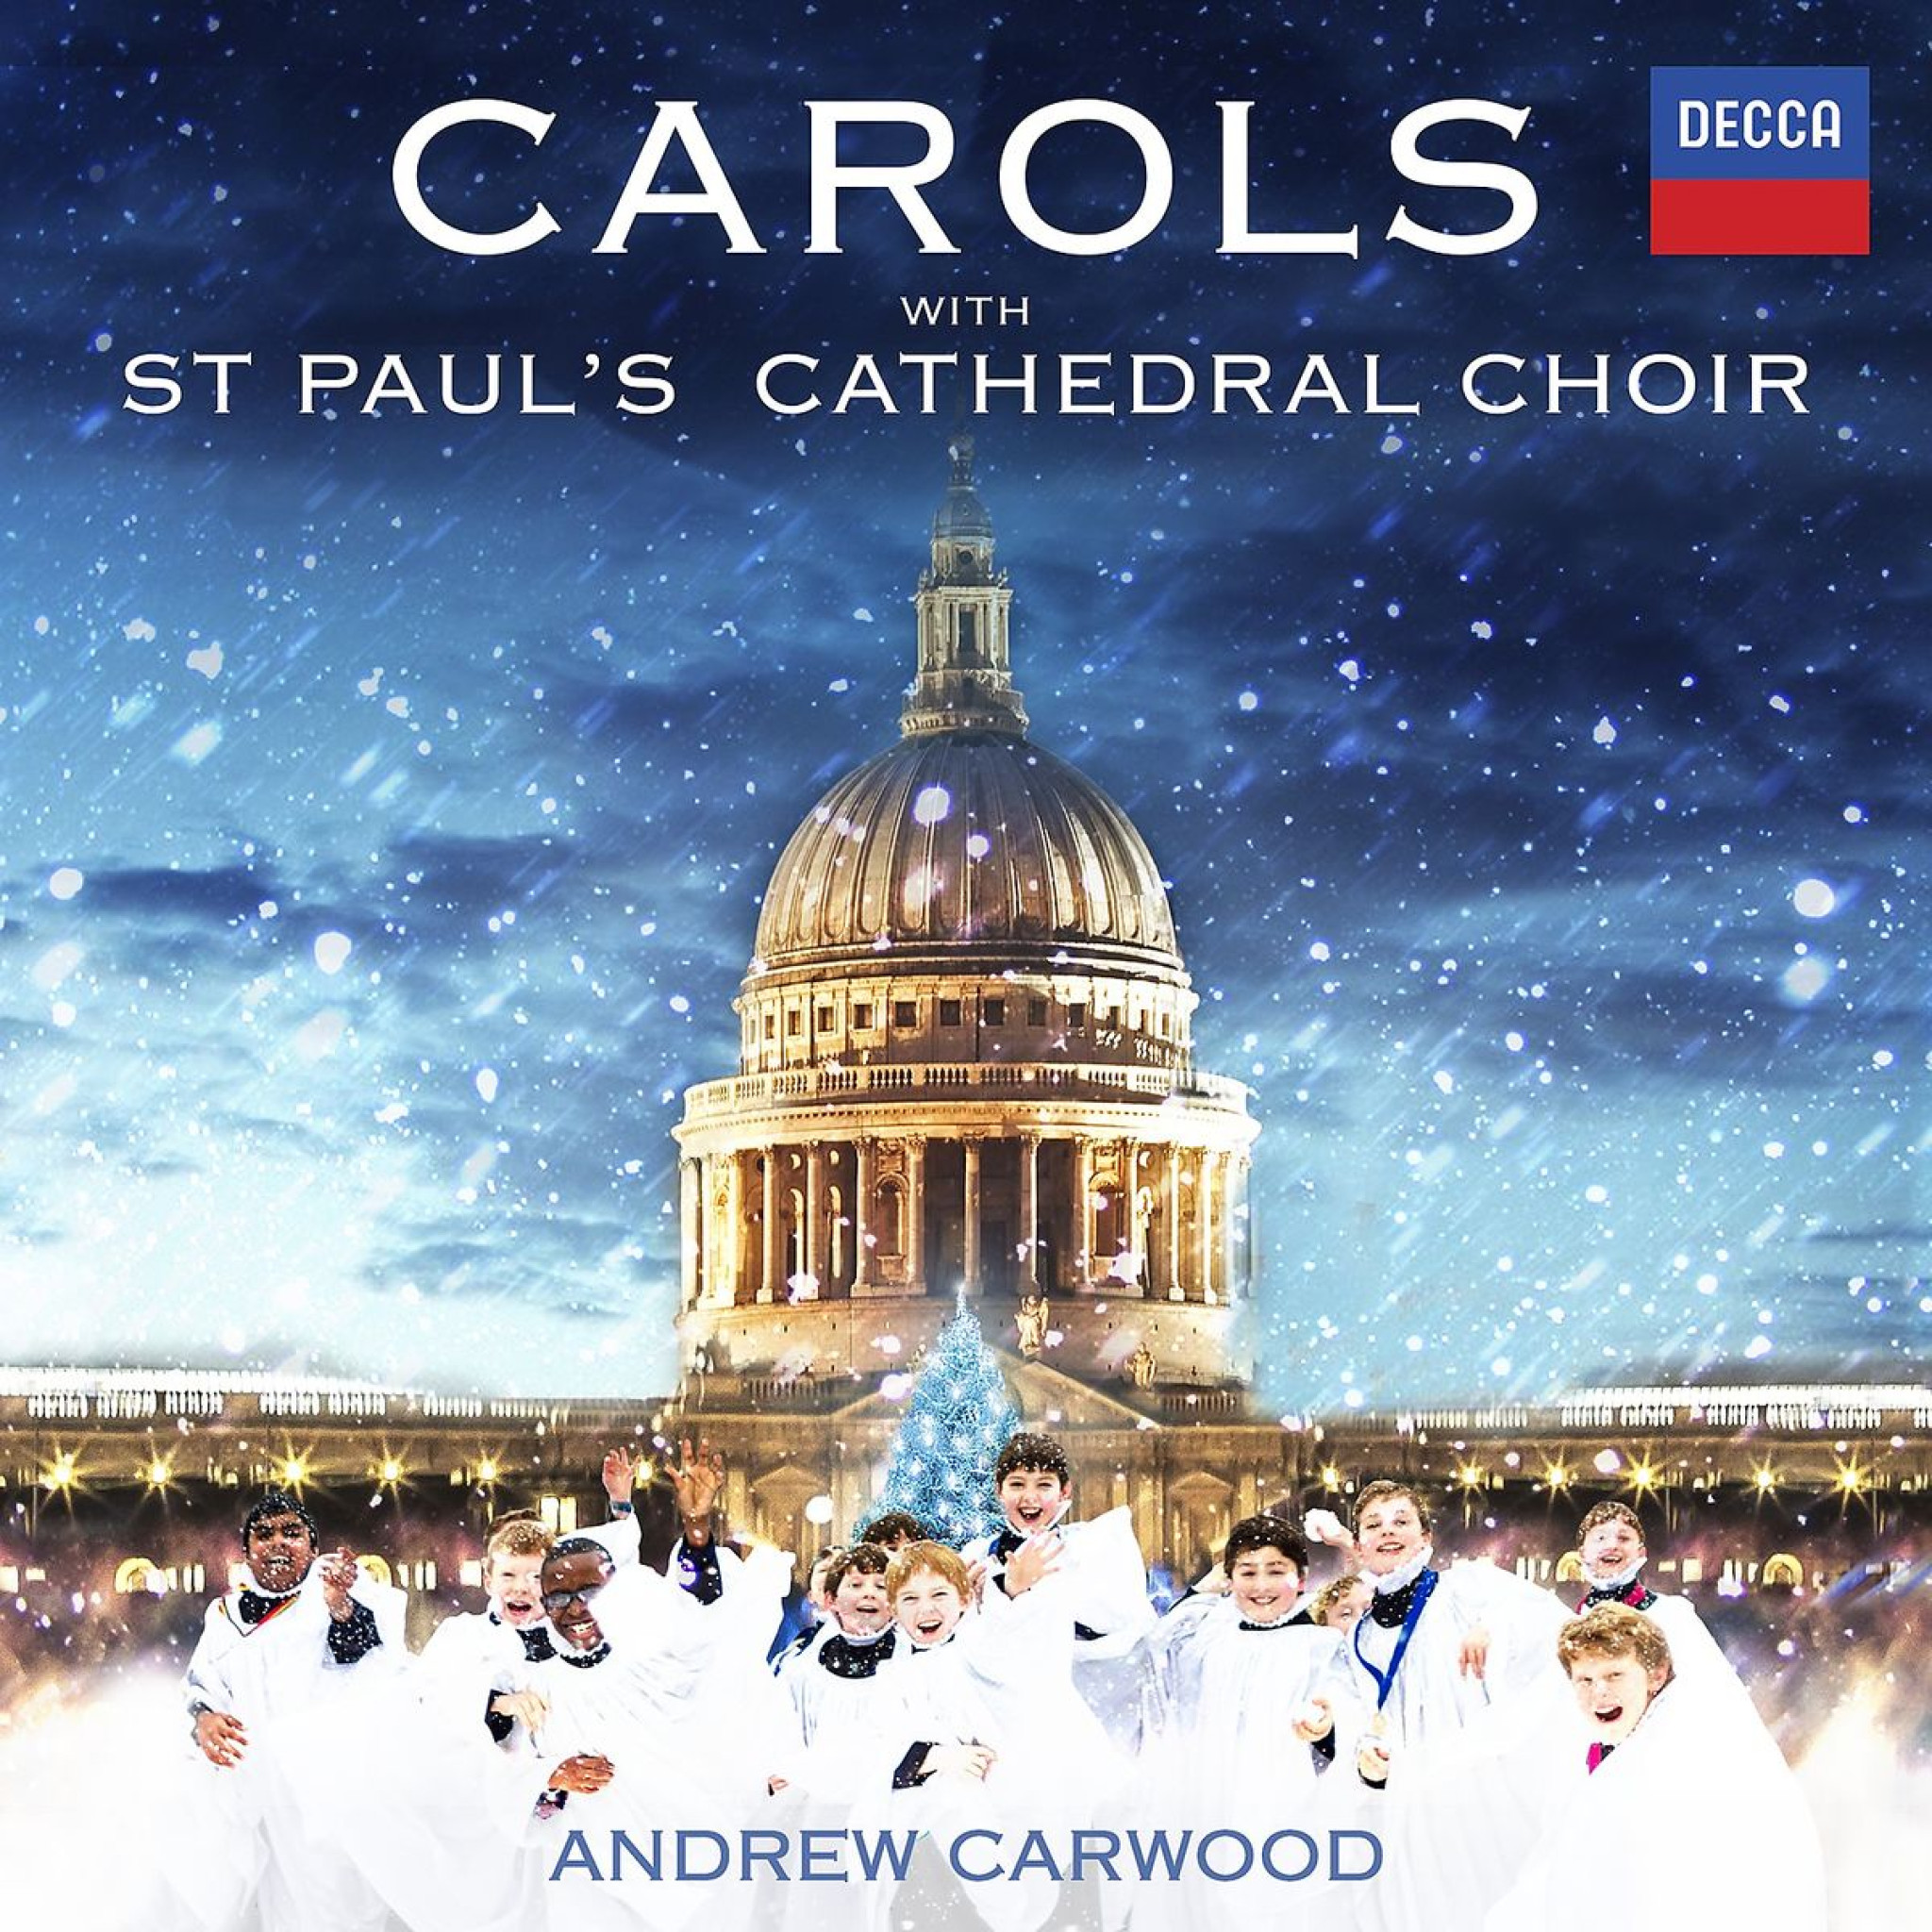 CAROLS WITH ST PAUL'S CATHEDRAL CHOIR